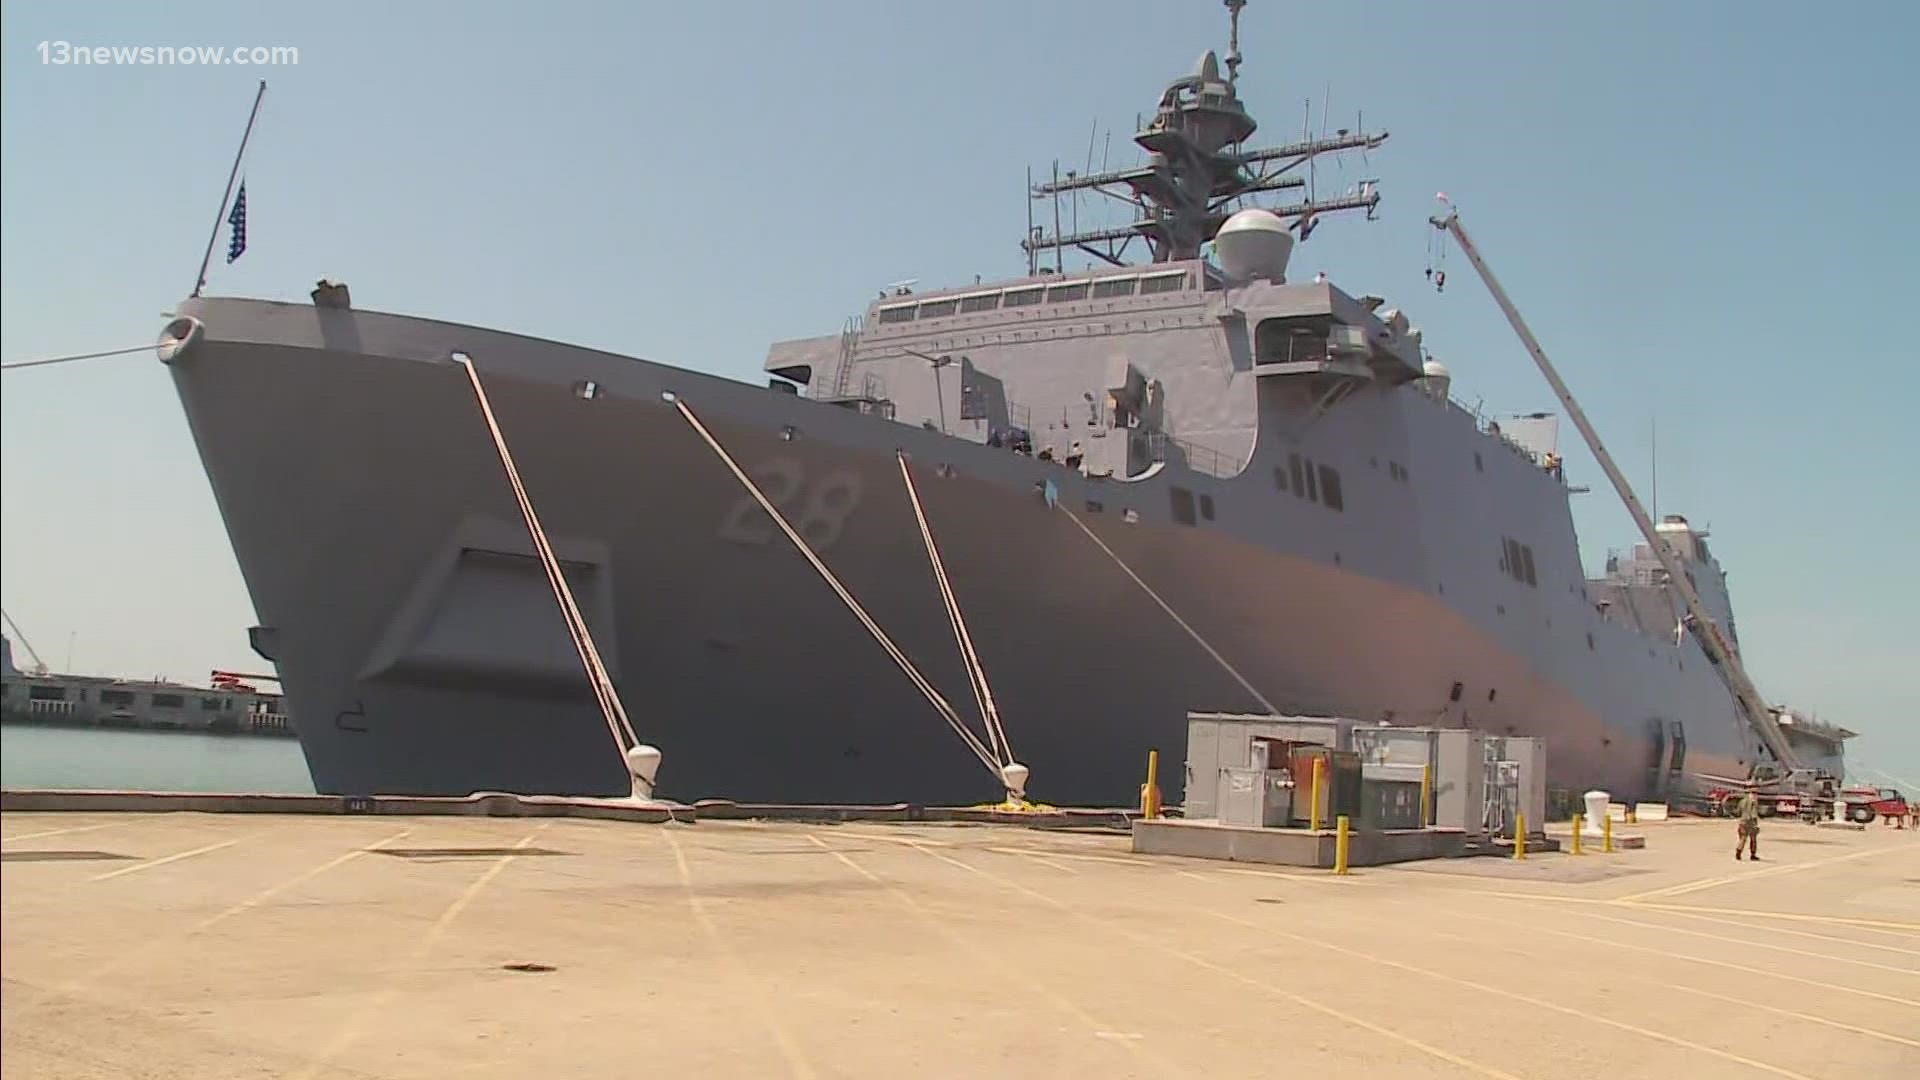 This is the ship the U.S. Navy is calling its newly-commissioned amphibious transport dock. It will fall under Expeditionary Strike Group 2.